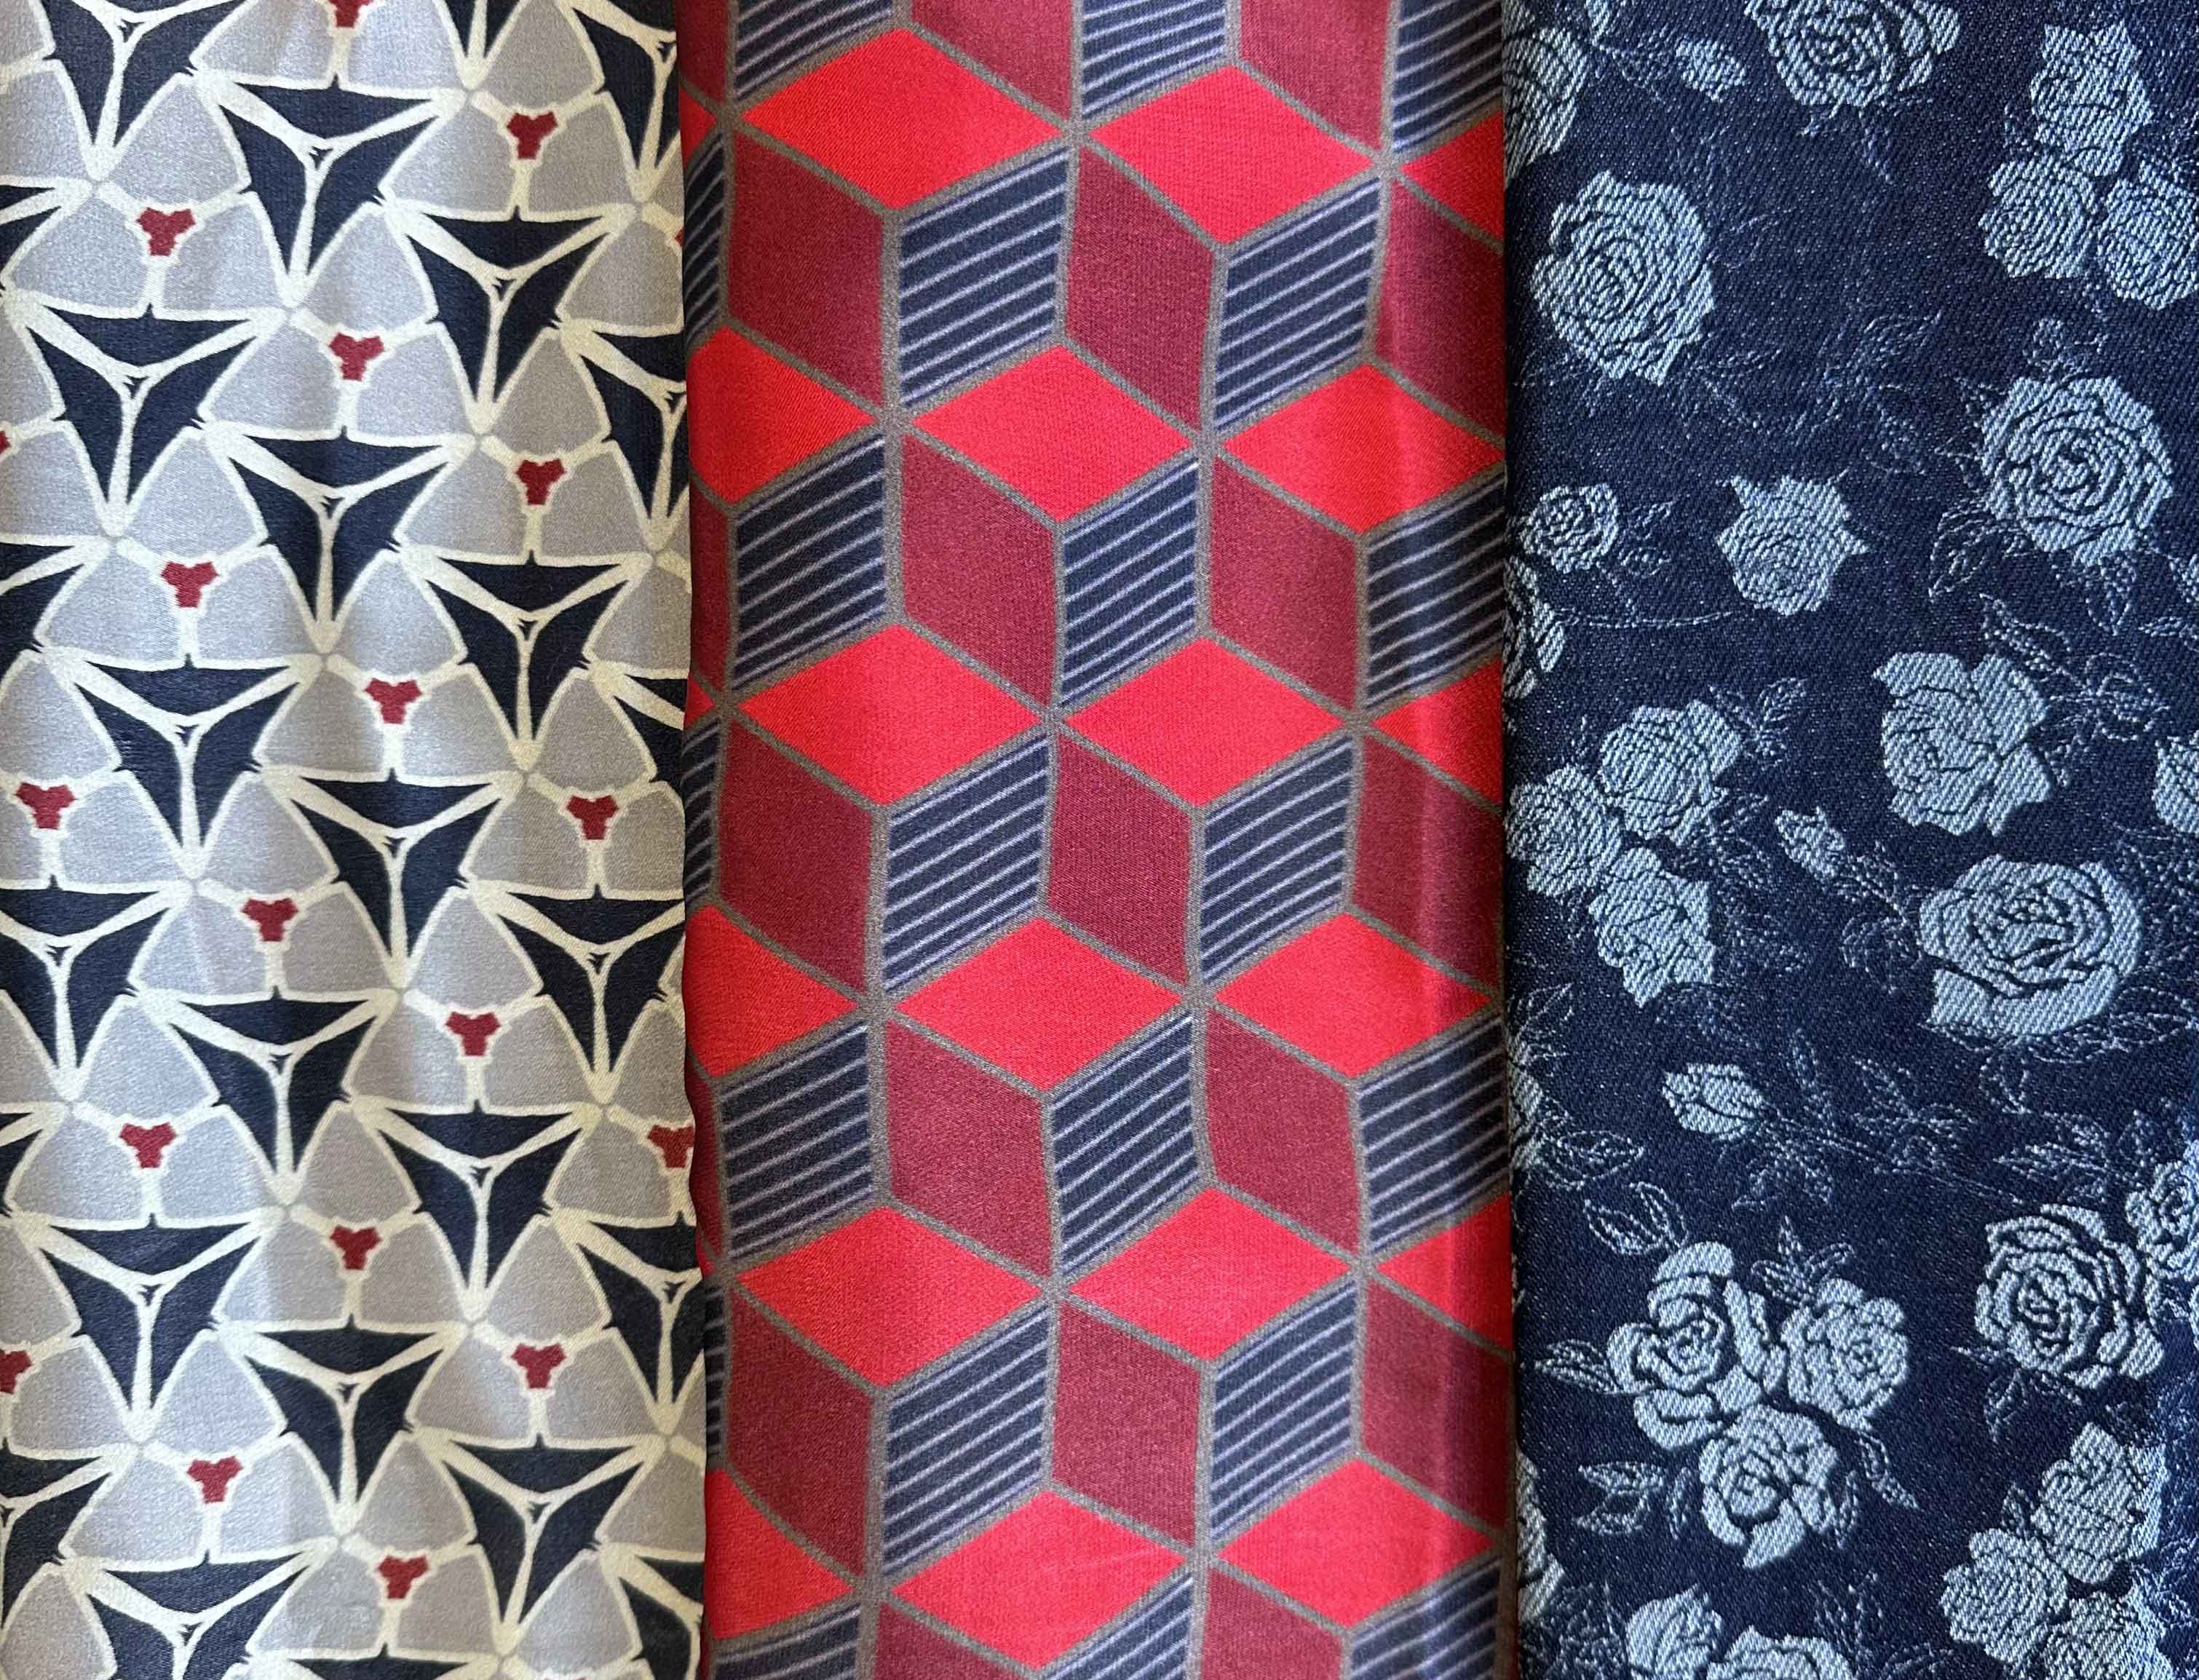 Bold digital prints and denim rastering on denim by Cara Ellaway. Patterns are denim with white and red, one triangular, one geometric cubes and one a rose pattern.